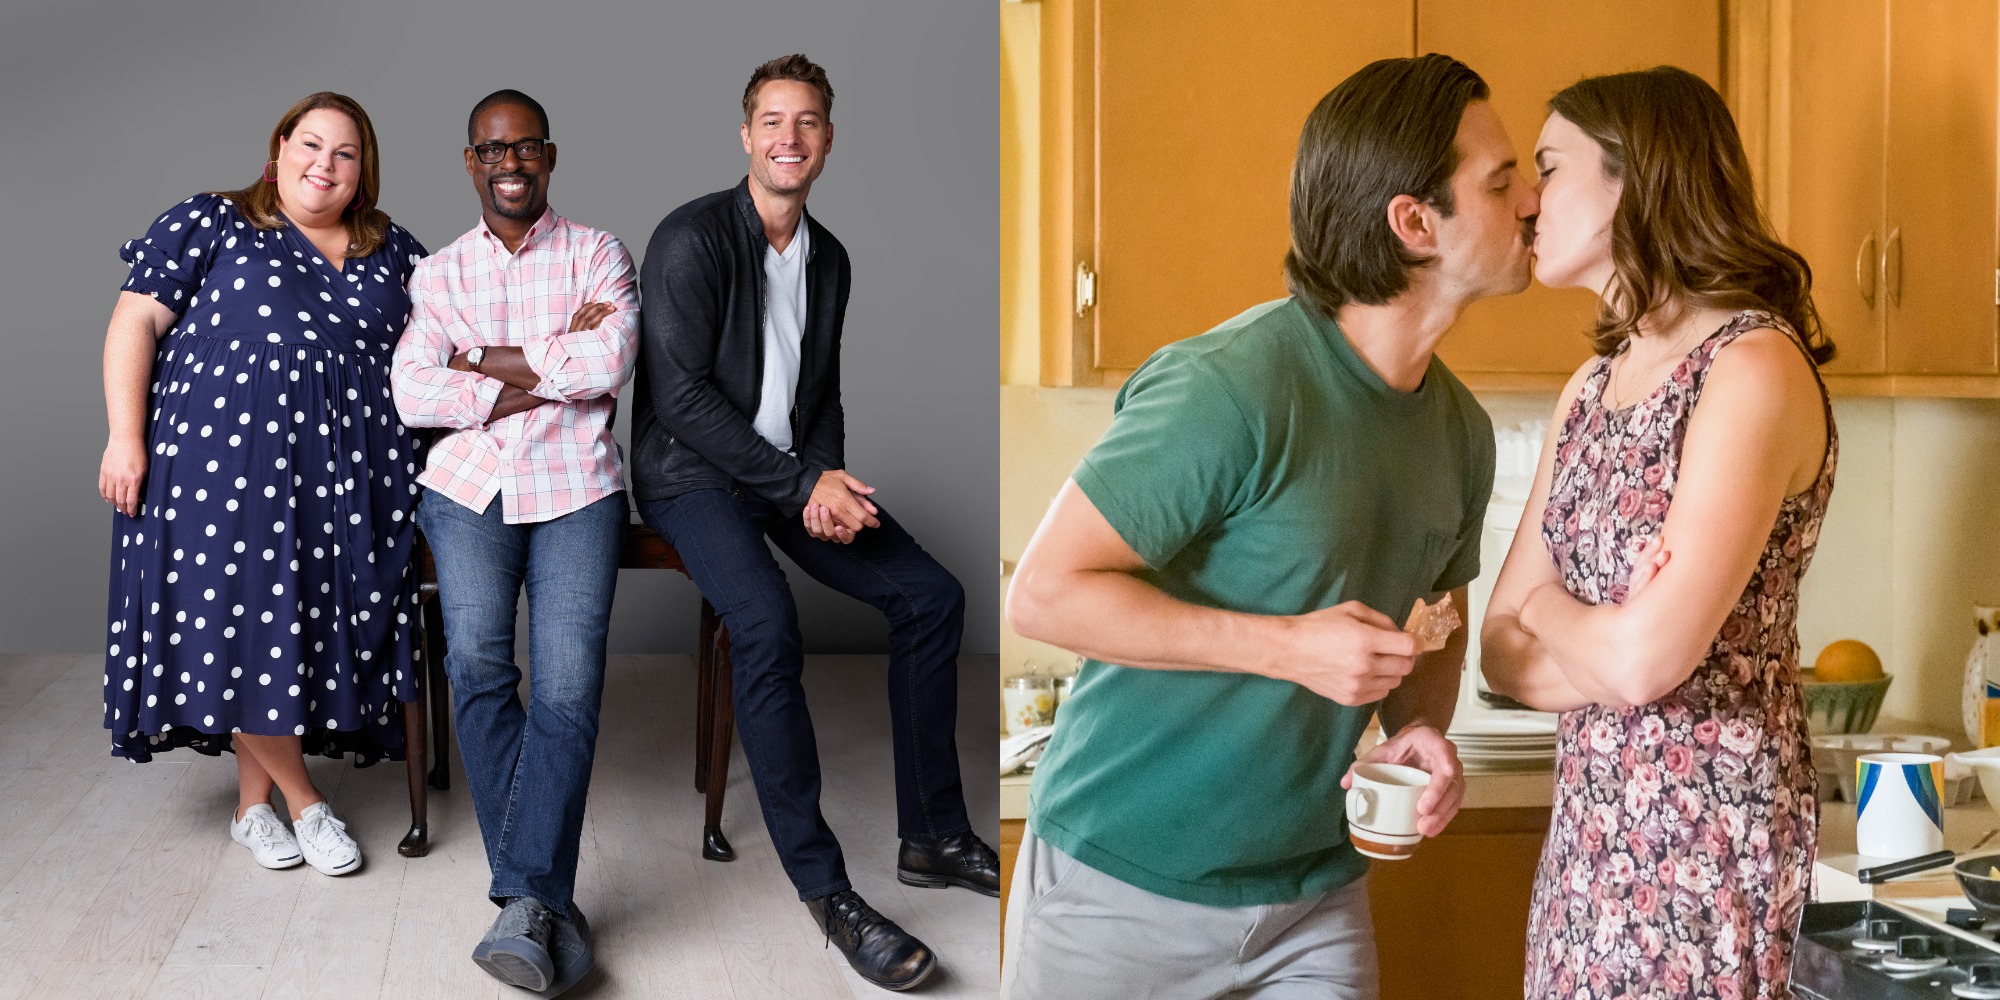 Chrissy Metz, Sterling K. Brown, Justin Hartley, Milo Ventimiglia and Mandy Moore in side by side photographs promoting 'This Is Us.'